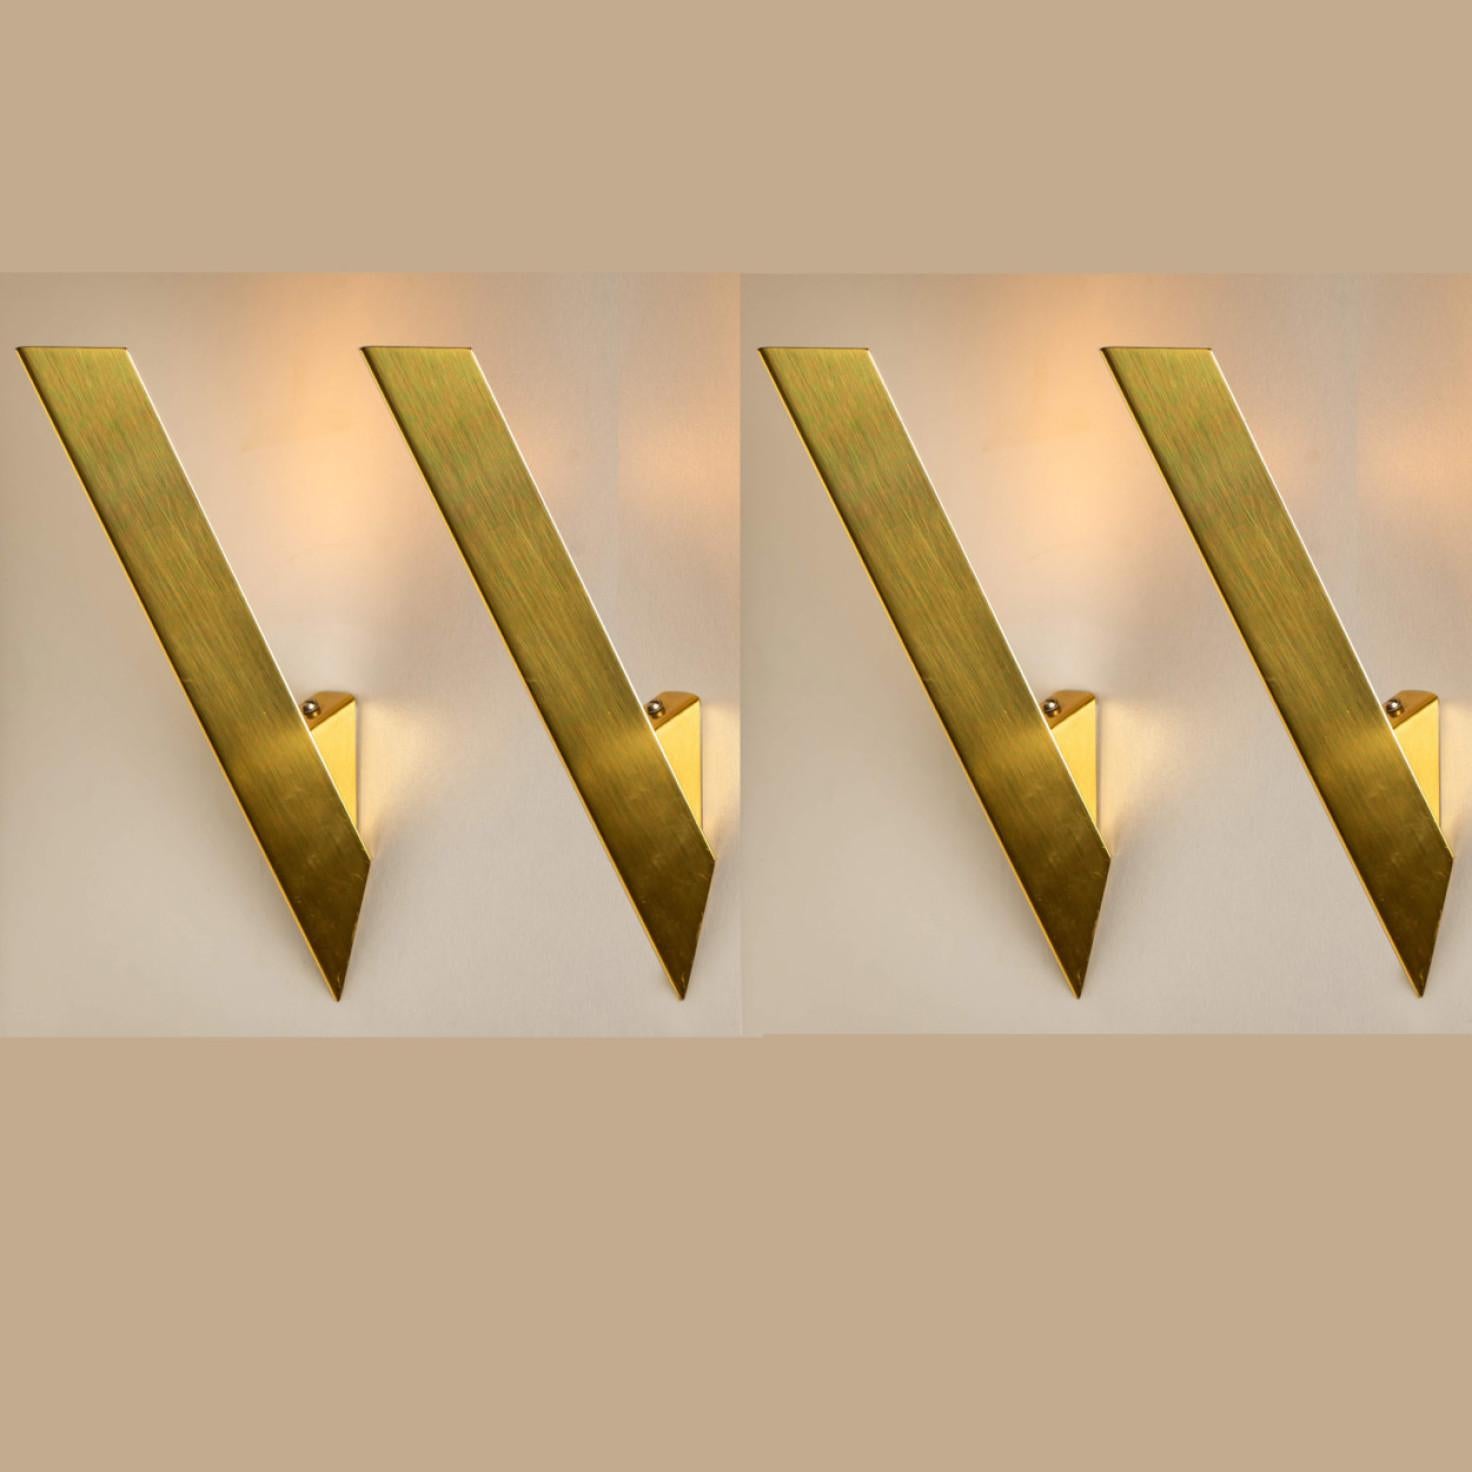 Beautiful wedge-shaped high end wall lights by J.T. Kalmar, 1970s, Austria.
Quality brass frame in an elegant warm gold color,

The light will bring a touch of intimacy. Suitable for a staircase, kitchen, hall or bedroom.

Heavy quality, in good